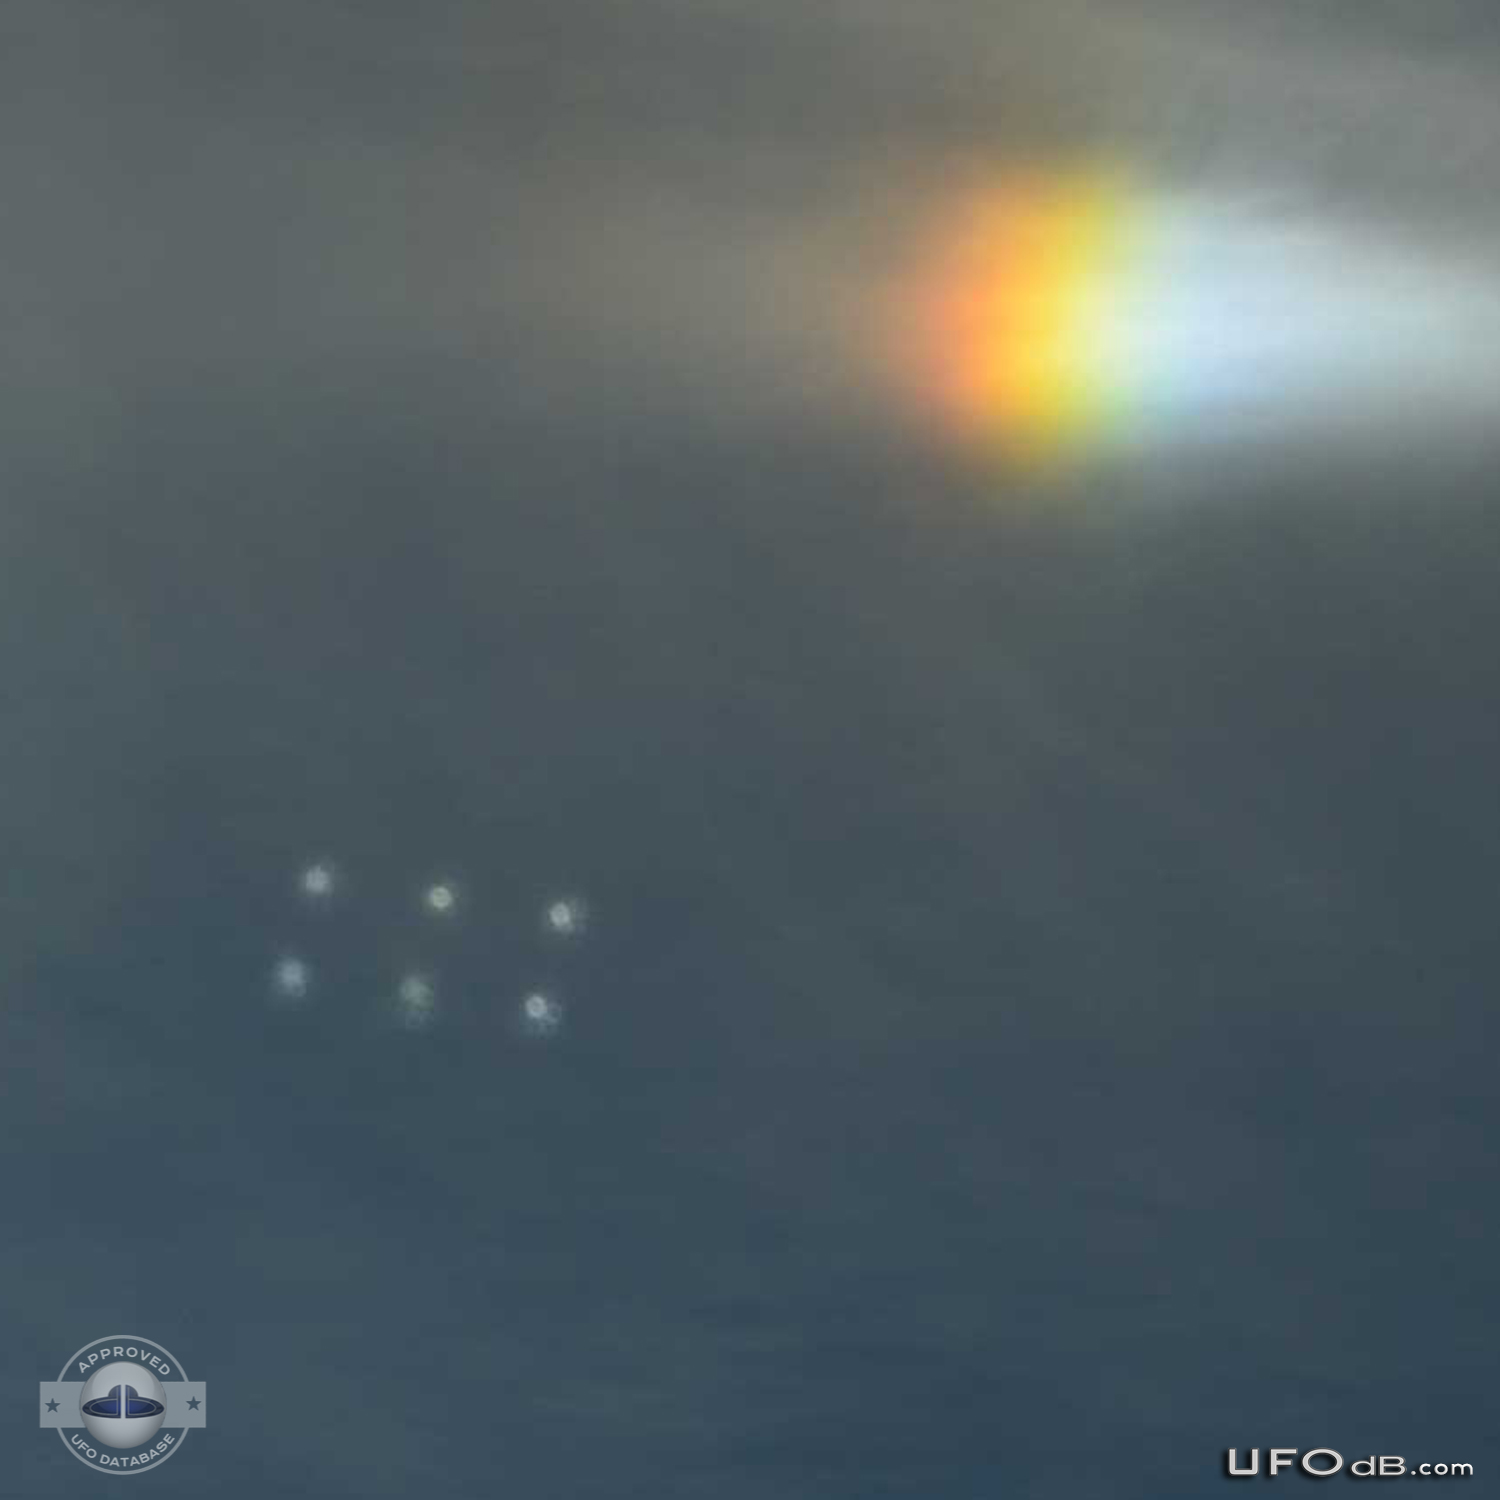 Pictures shot from bus reveals six ufos in a rectangle formation UFO Picture #383-2